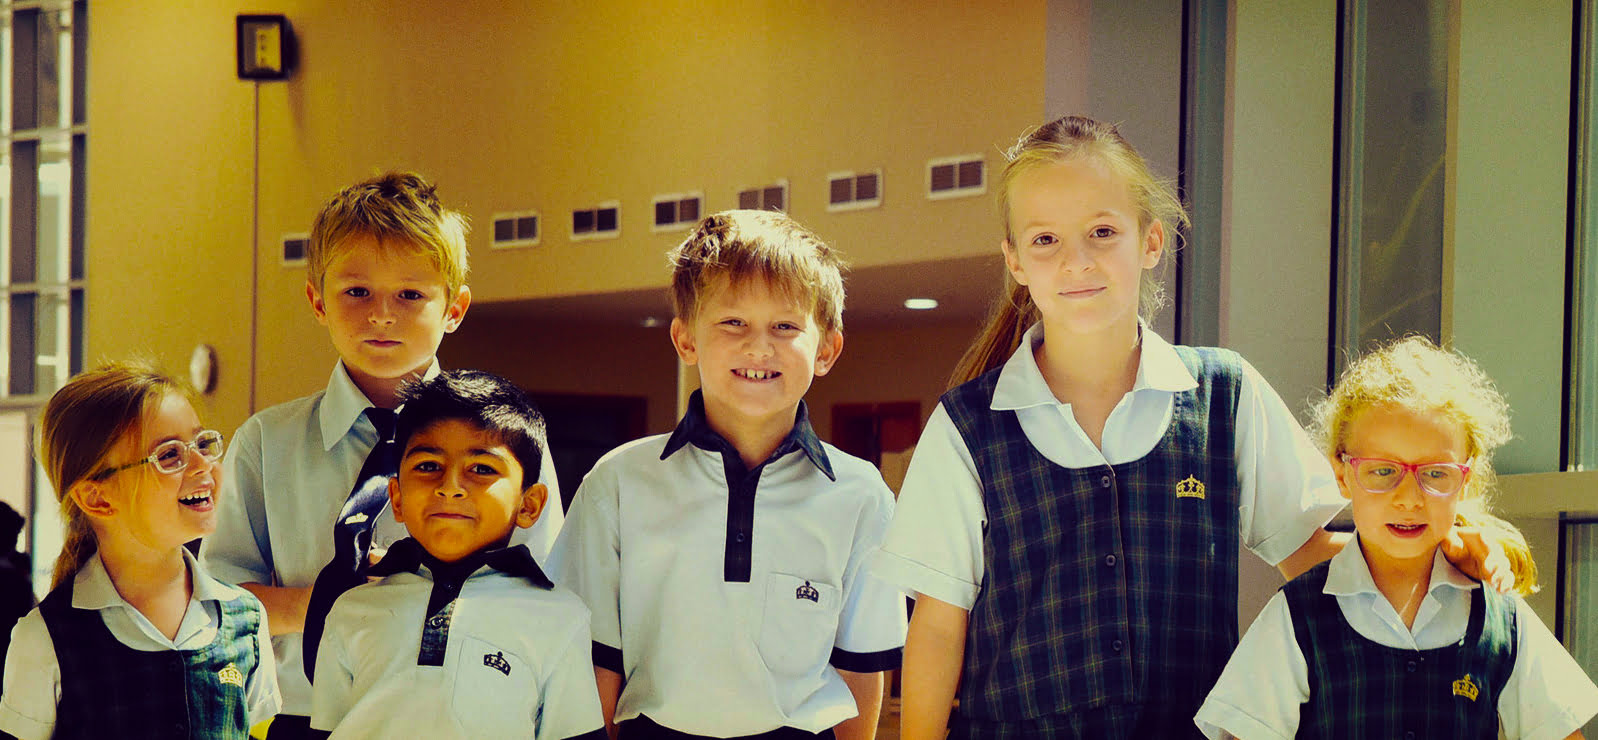 Photograph showing students from different grades in their school uniforms at Kings School Al Barsha - awarded one of the top 20 Best Schools in Dubai and Abu Dhabi by schoolscompared.com in 2017